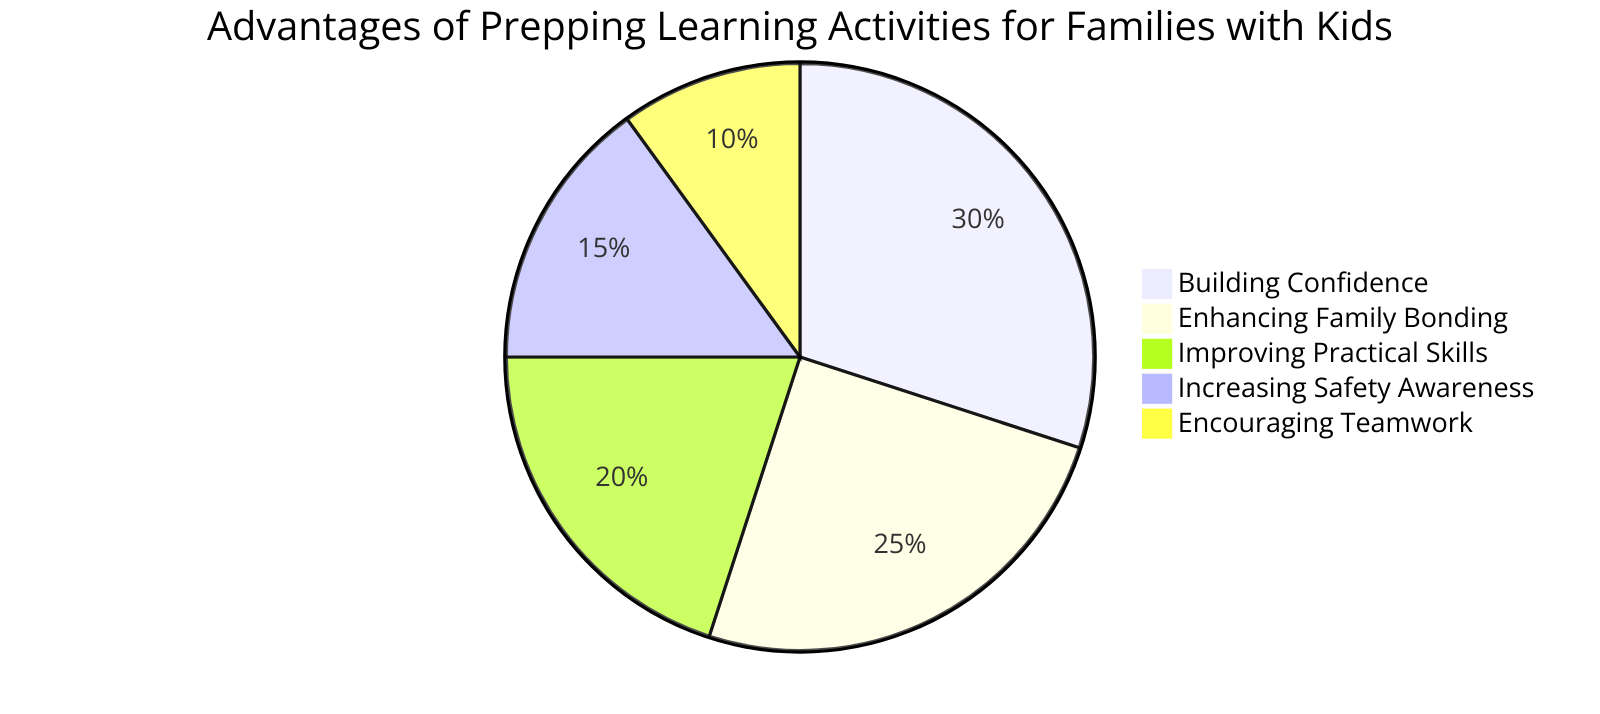 the advantages of prepping learning activities for families with kids